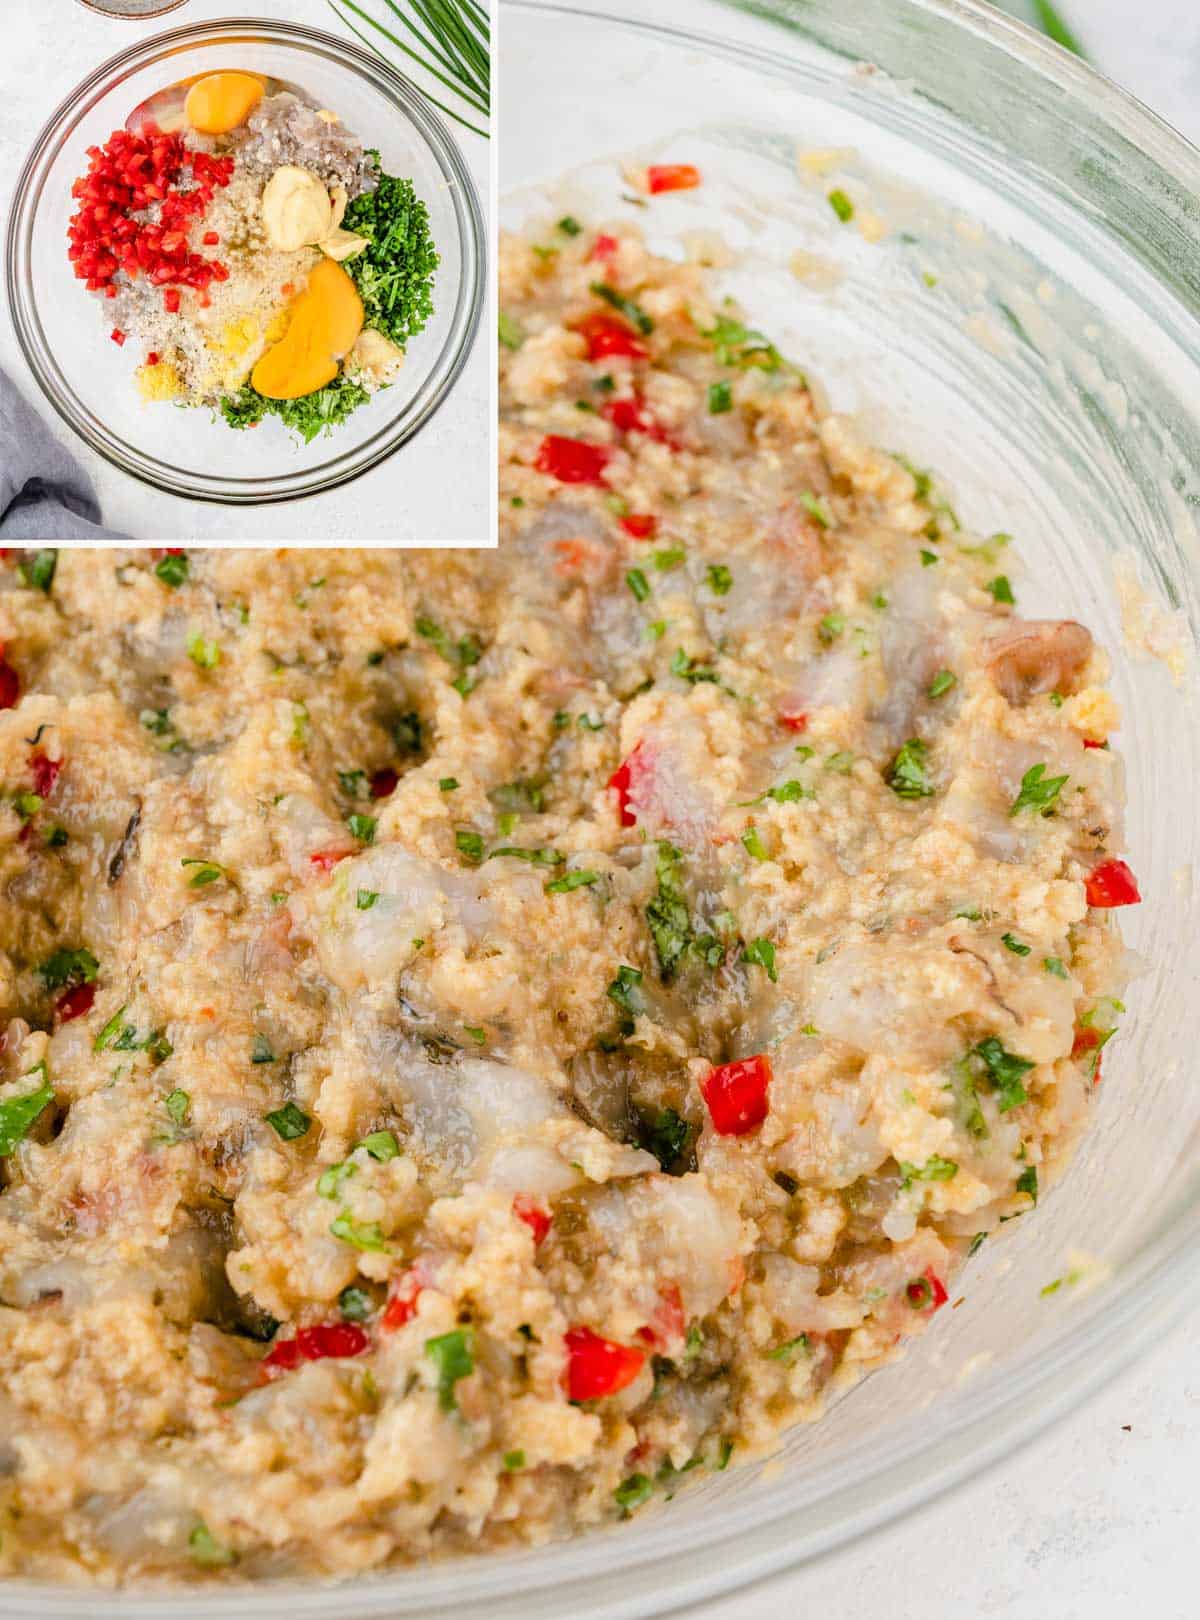 Shrimp meat mixture for the shrimp cakes in a large bowl.